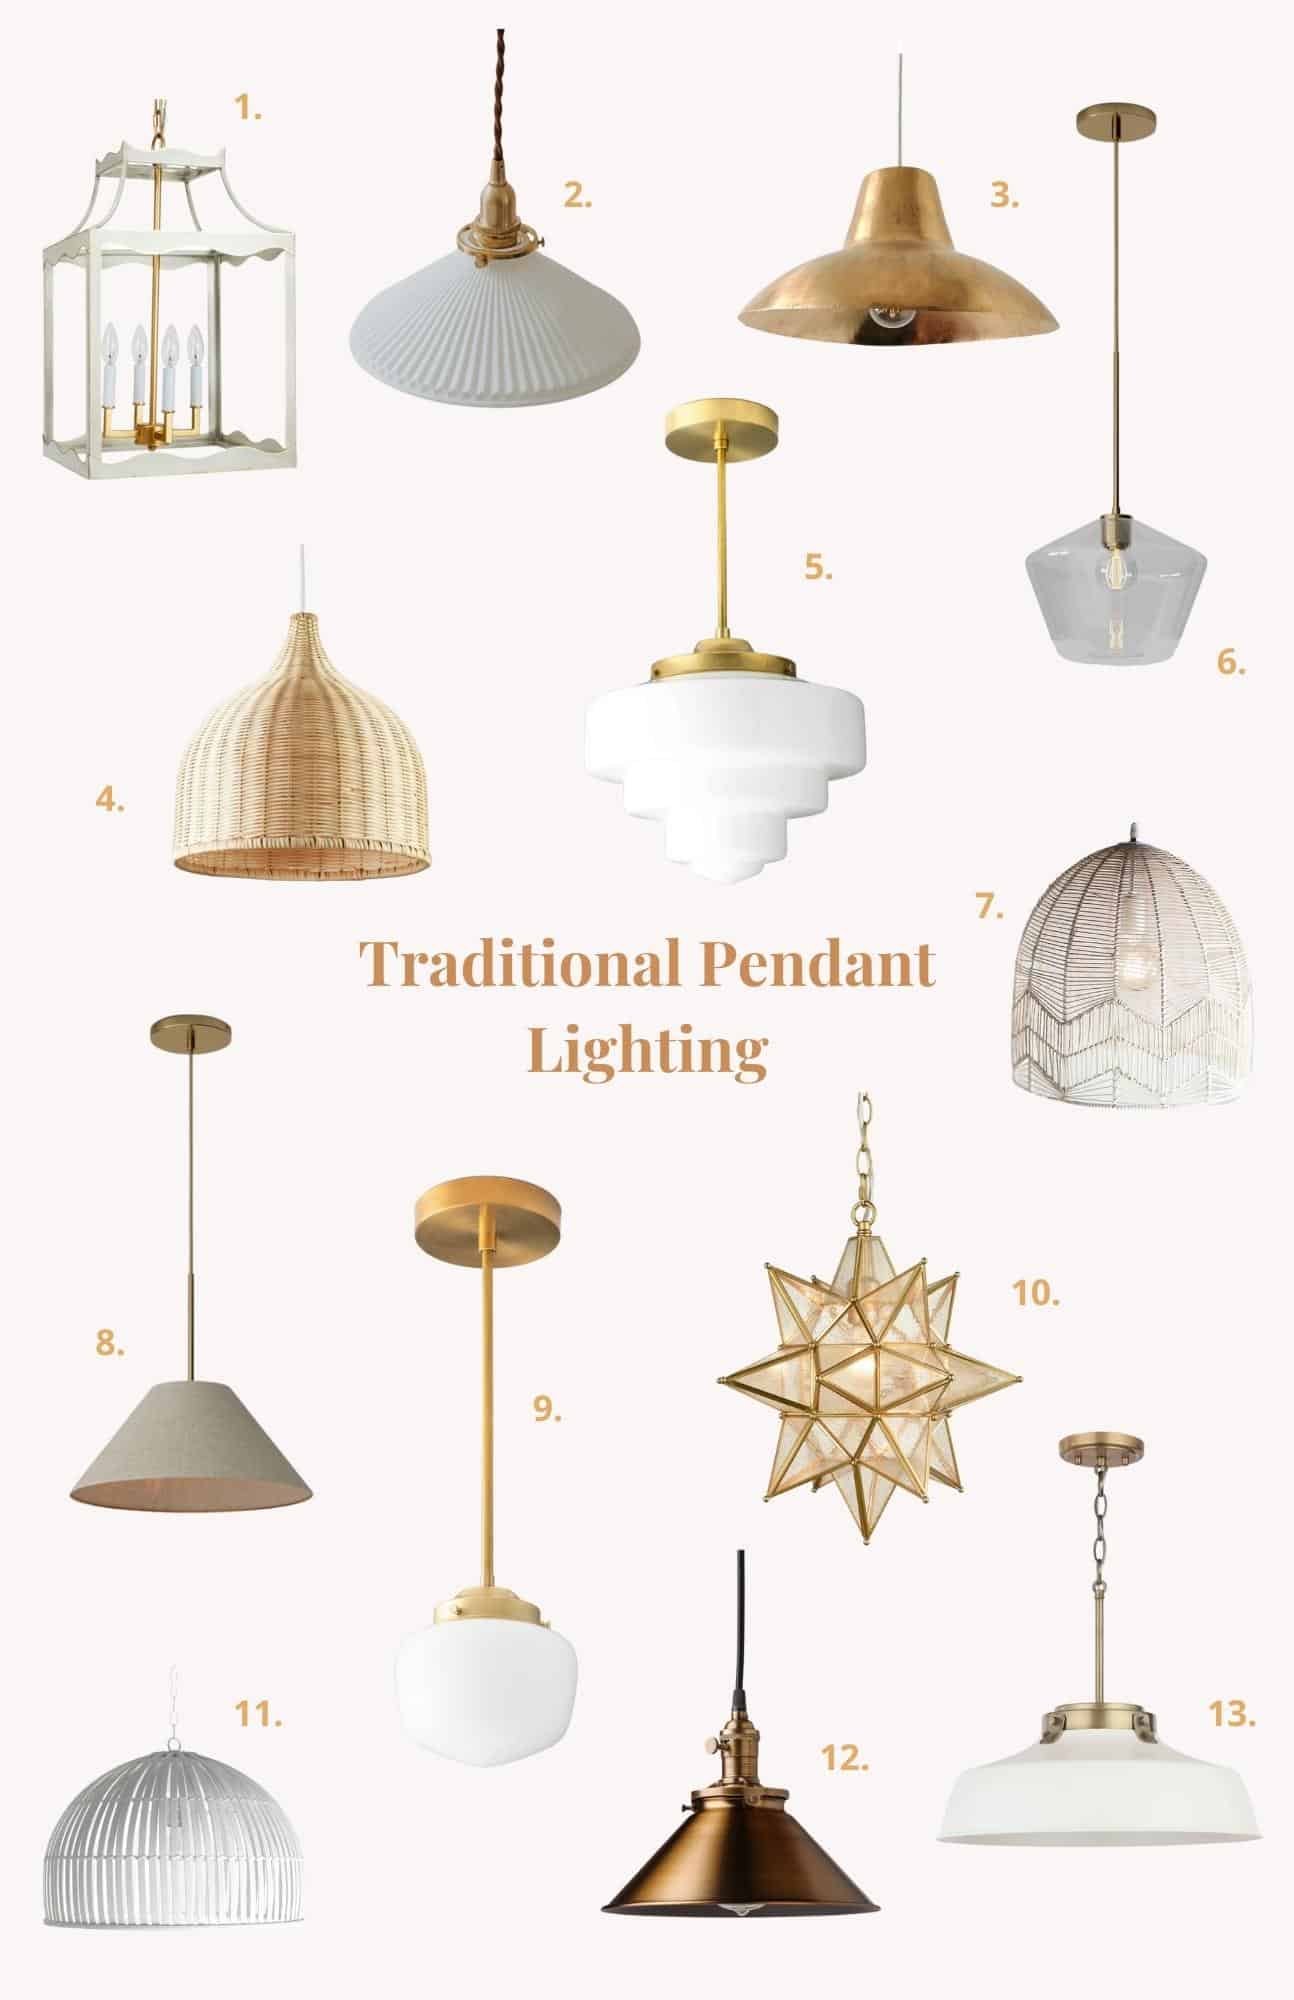 Collage of traditional lighting fixtures